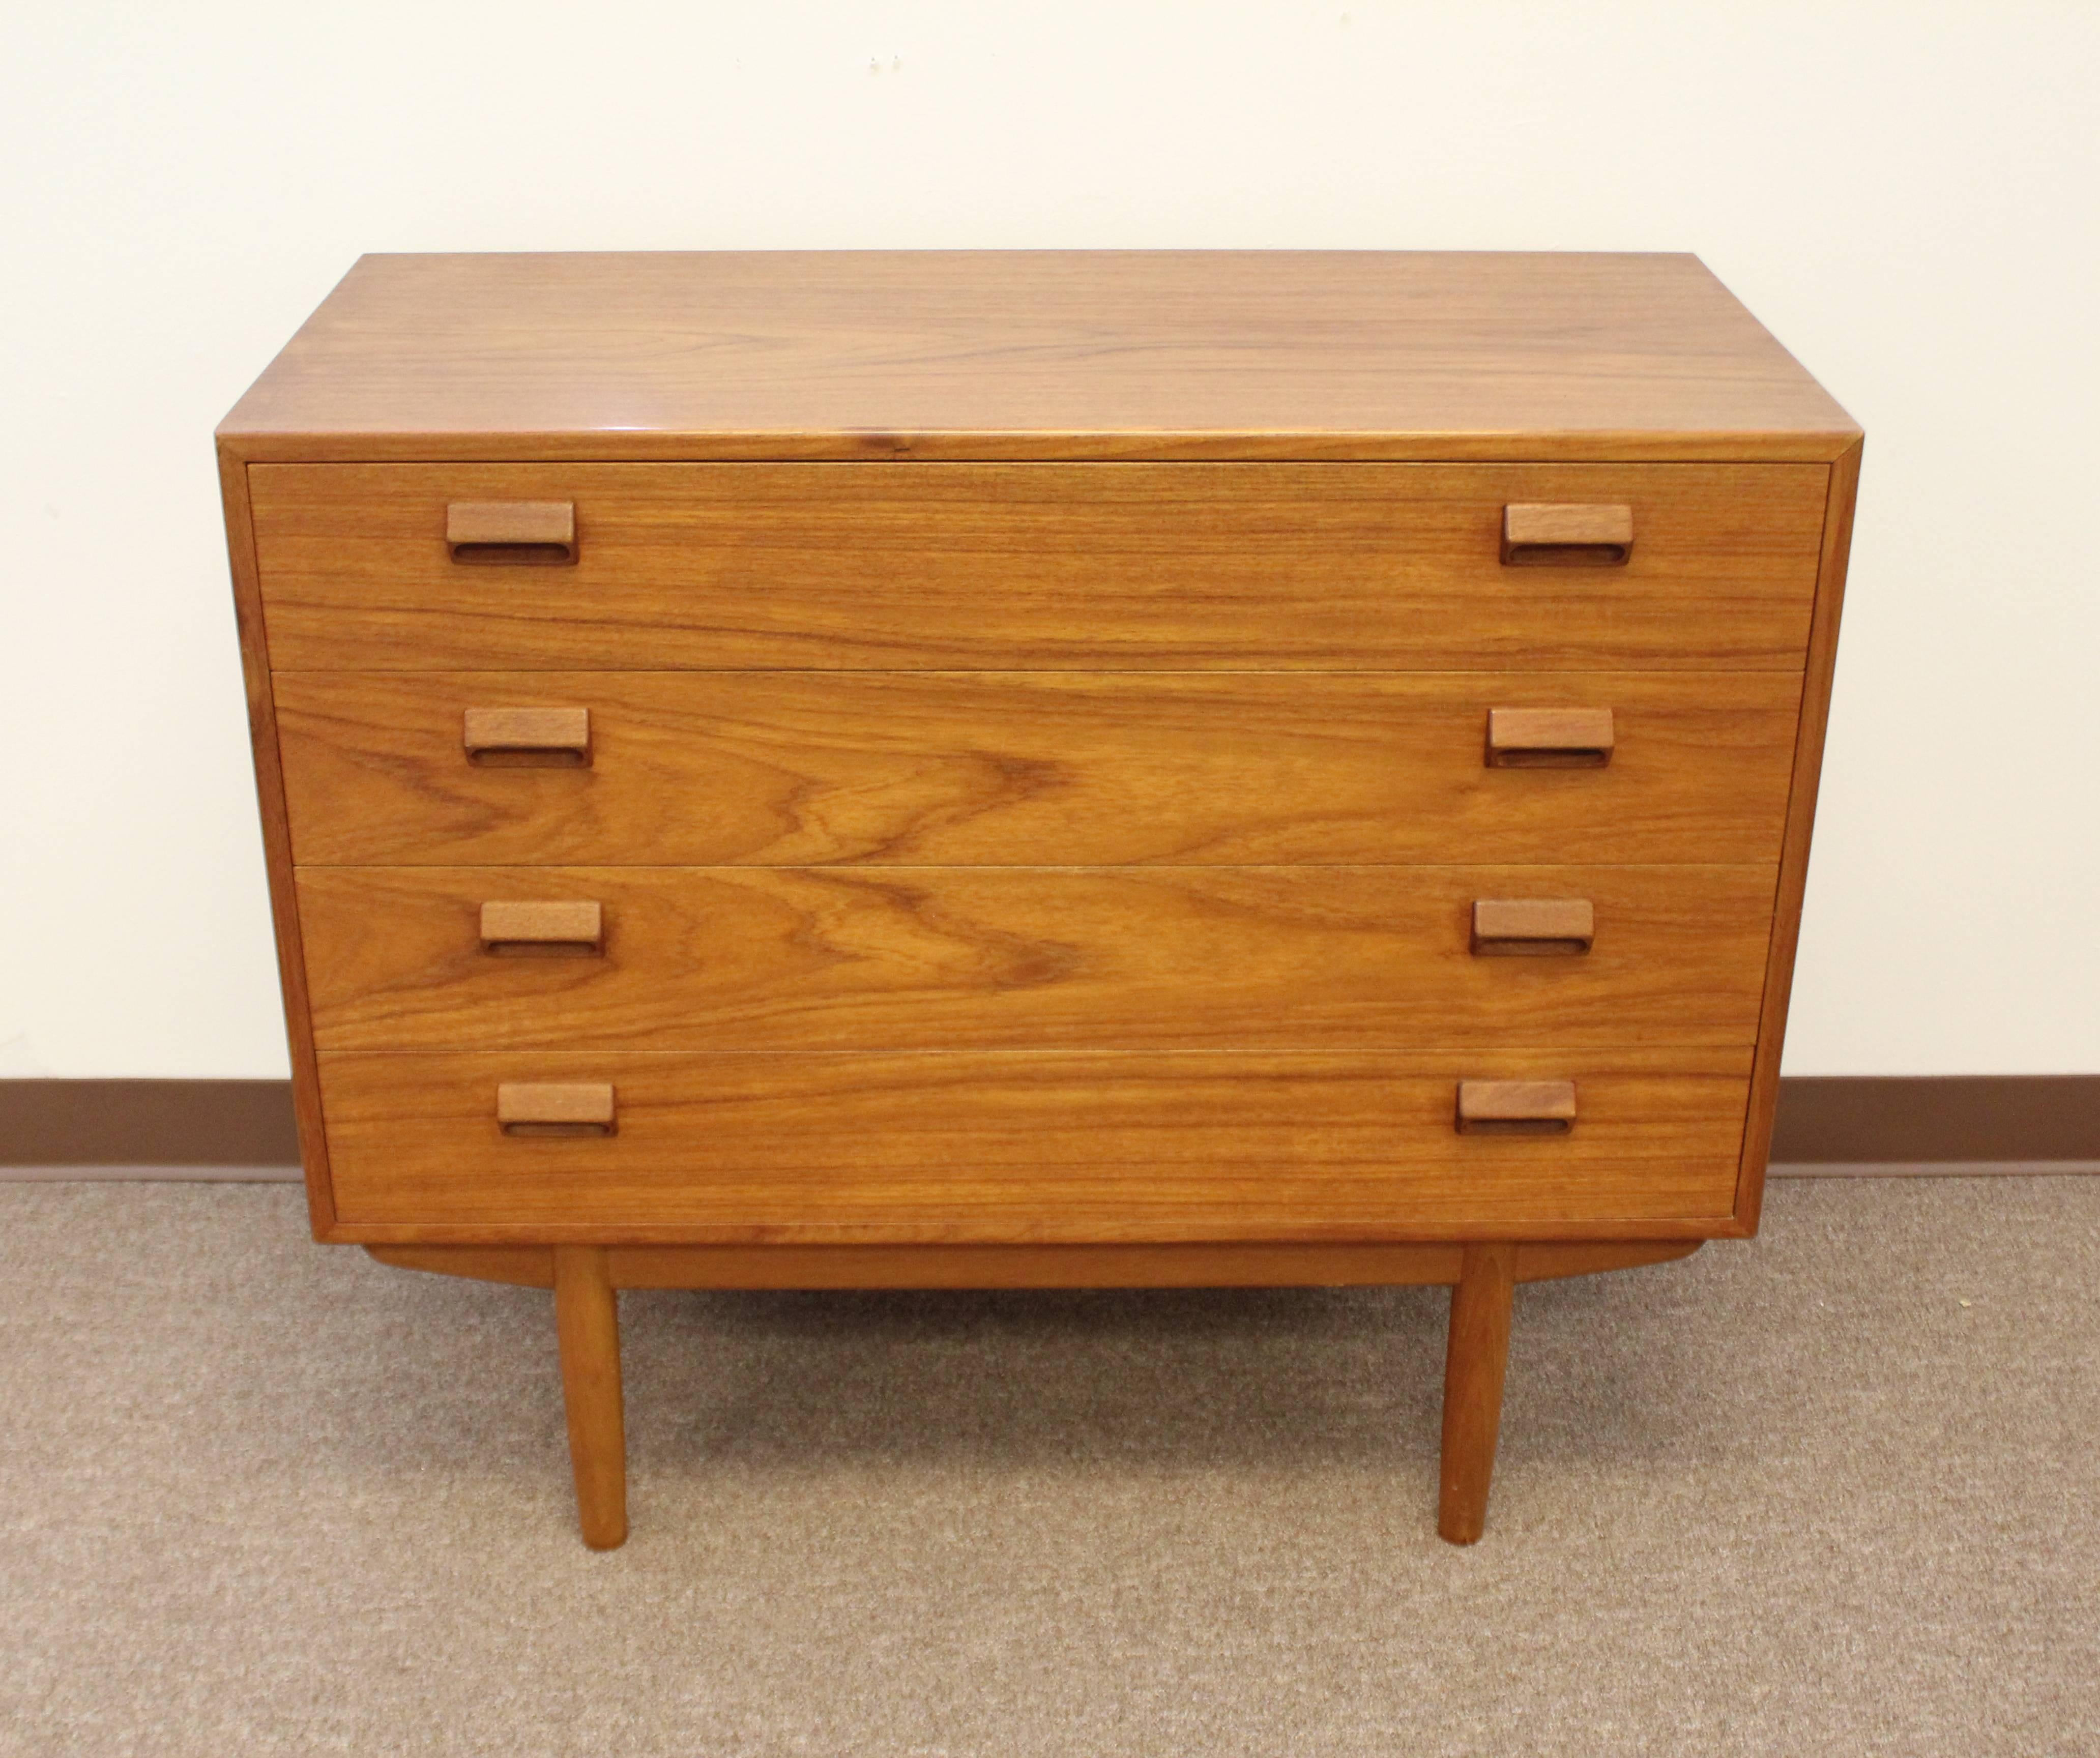 For your consideration is a gorgeous Danish four-drawer teak dresser by Børge Mogensen. In excellent condition. Comes from the original owners home. The dimensions are 39.5